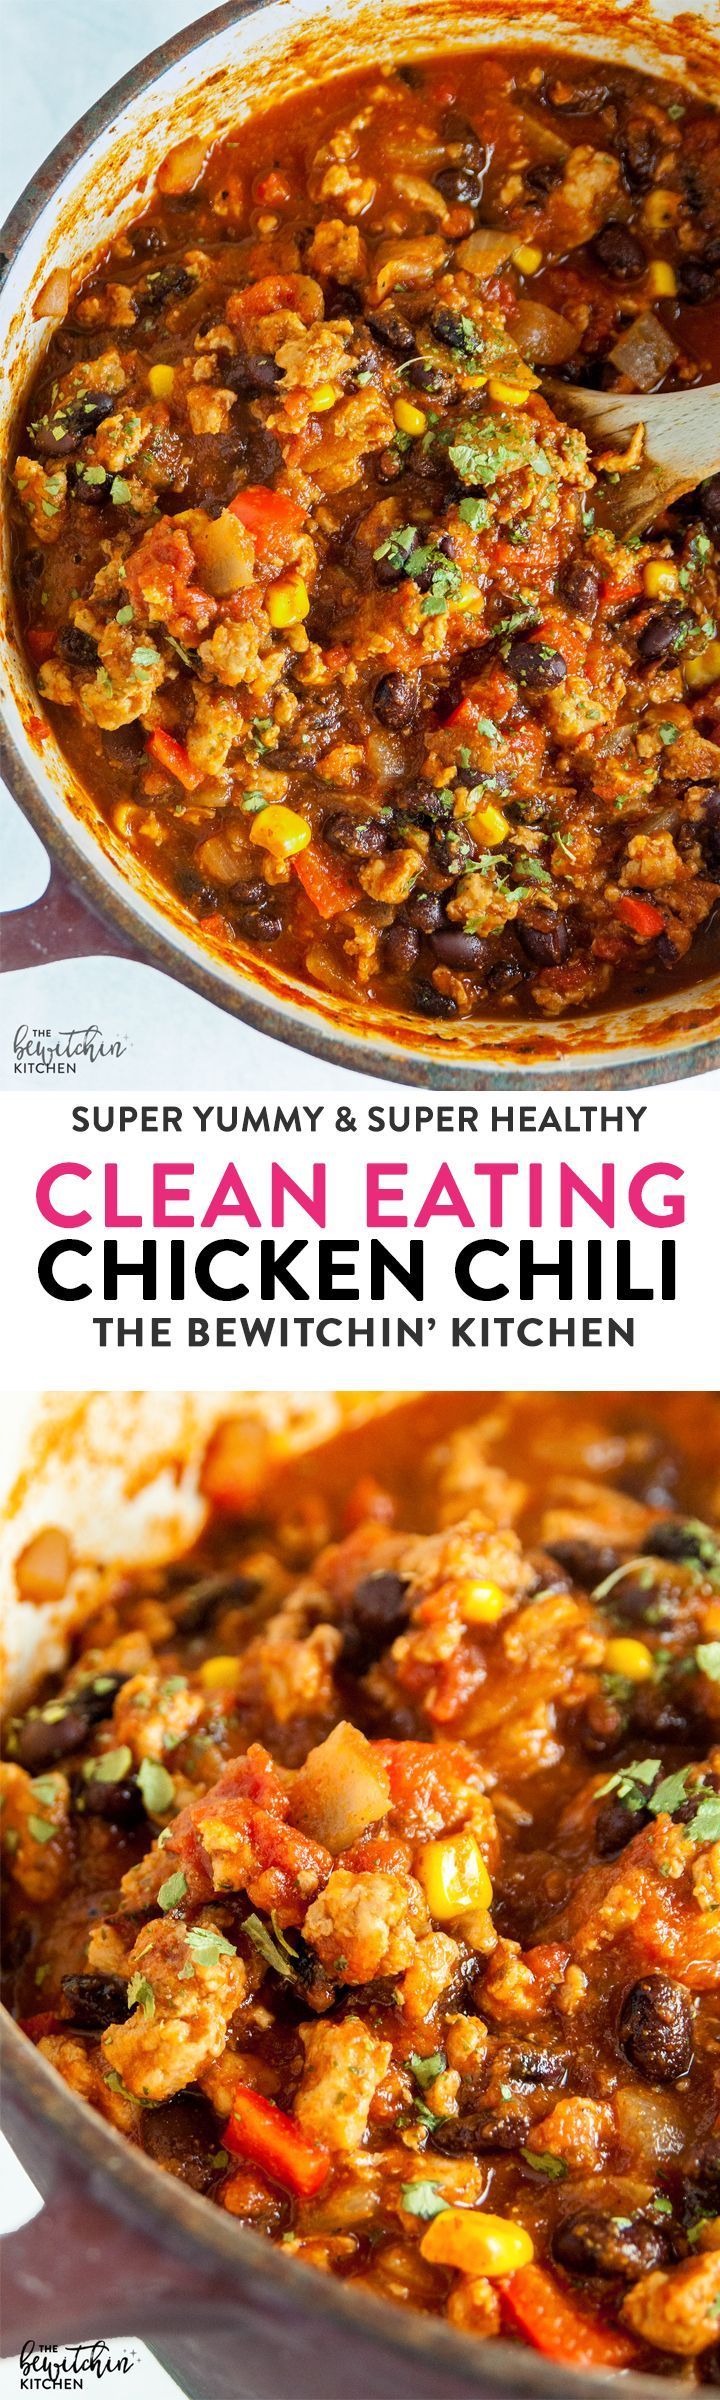 Clean Eating Chicken Chili – this hearty and healthy chili recipe is lightened up with ground chicken and is 21 day fix approved.